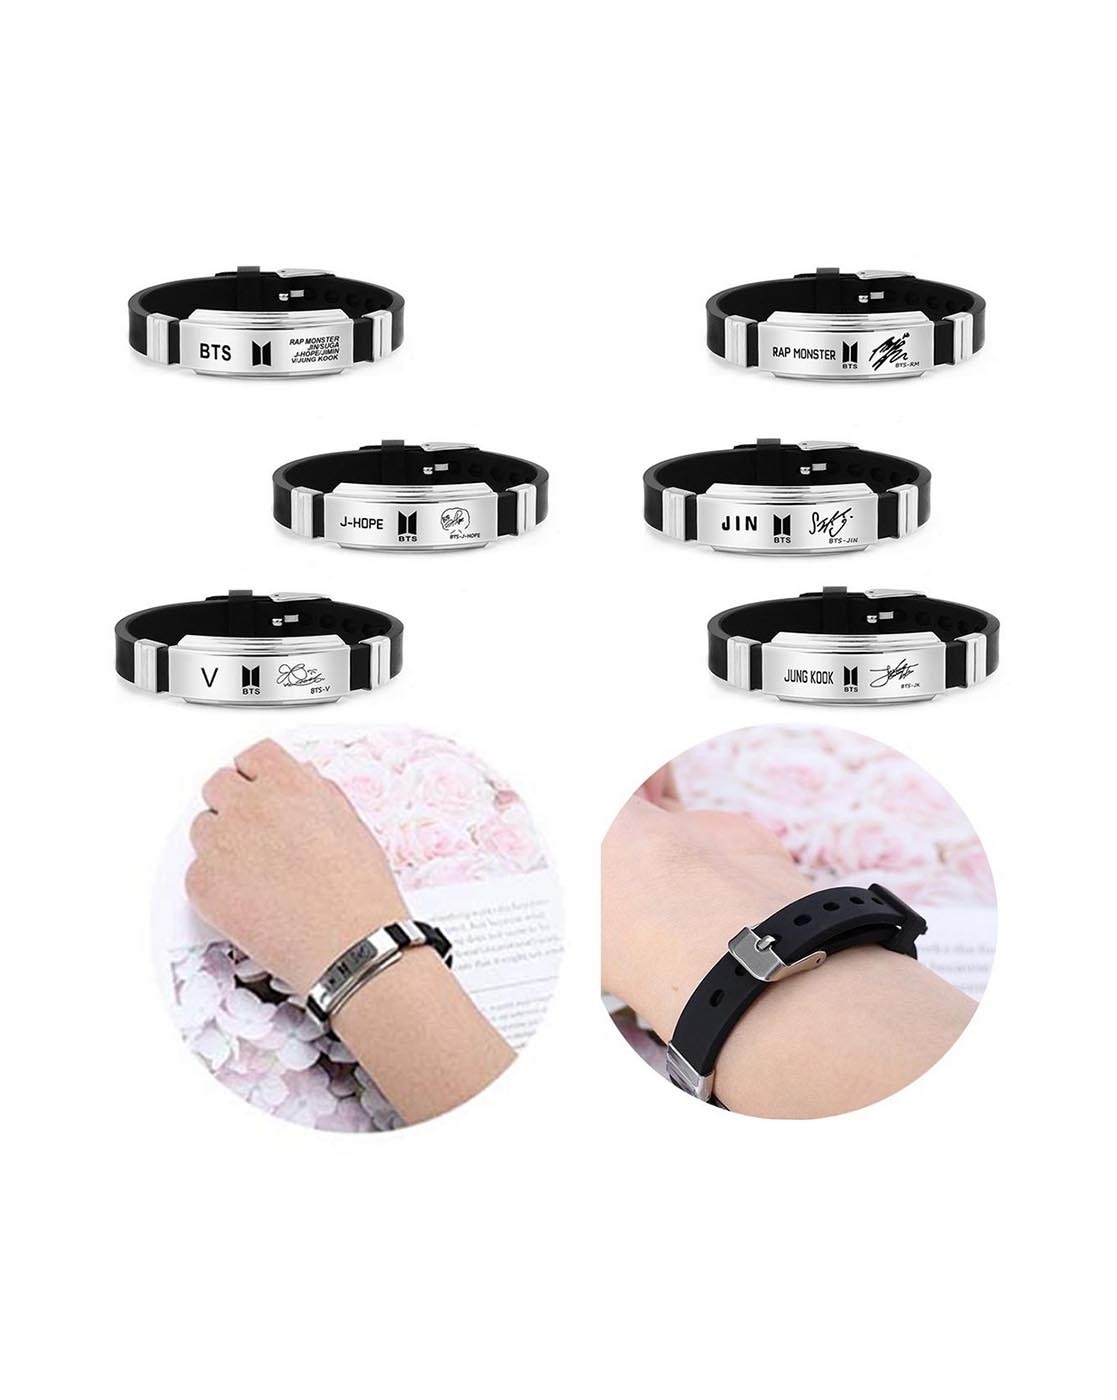 BTS Band Jungkook Bracelet Accessory Jewelry for Army Girl Birthday  Friendship Gift